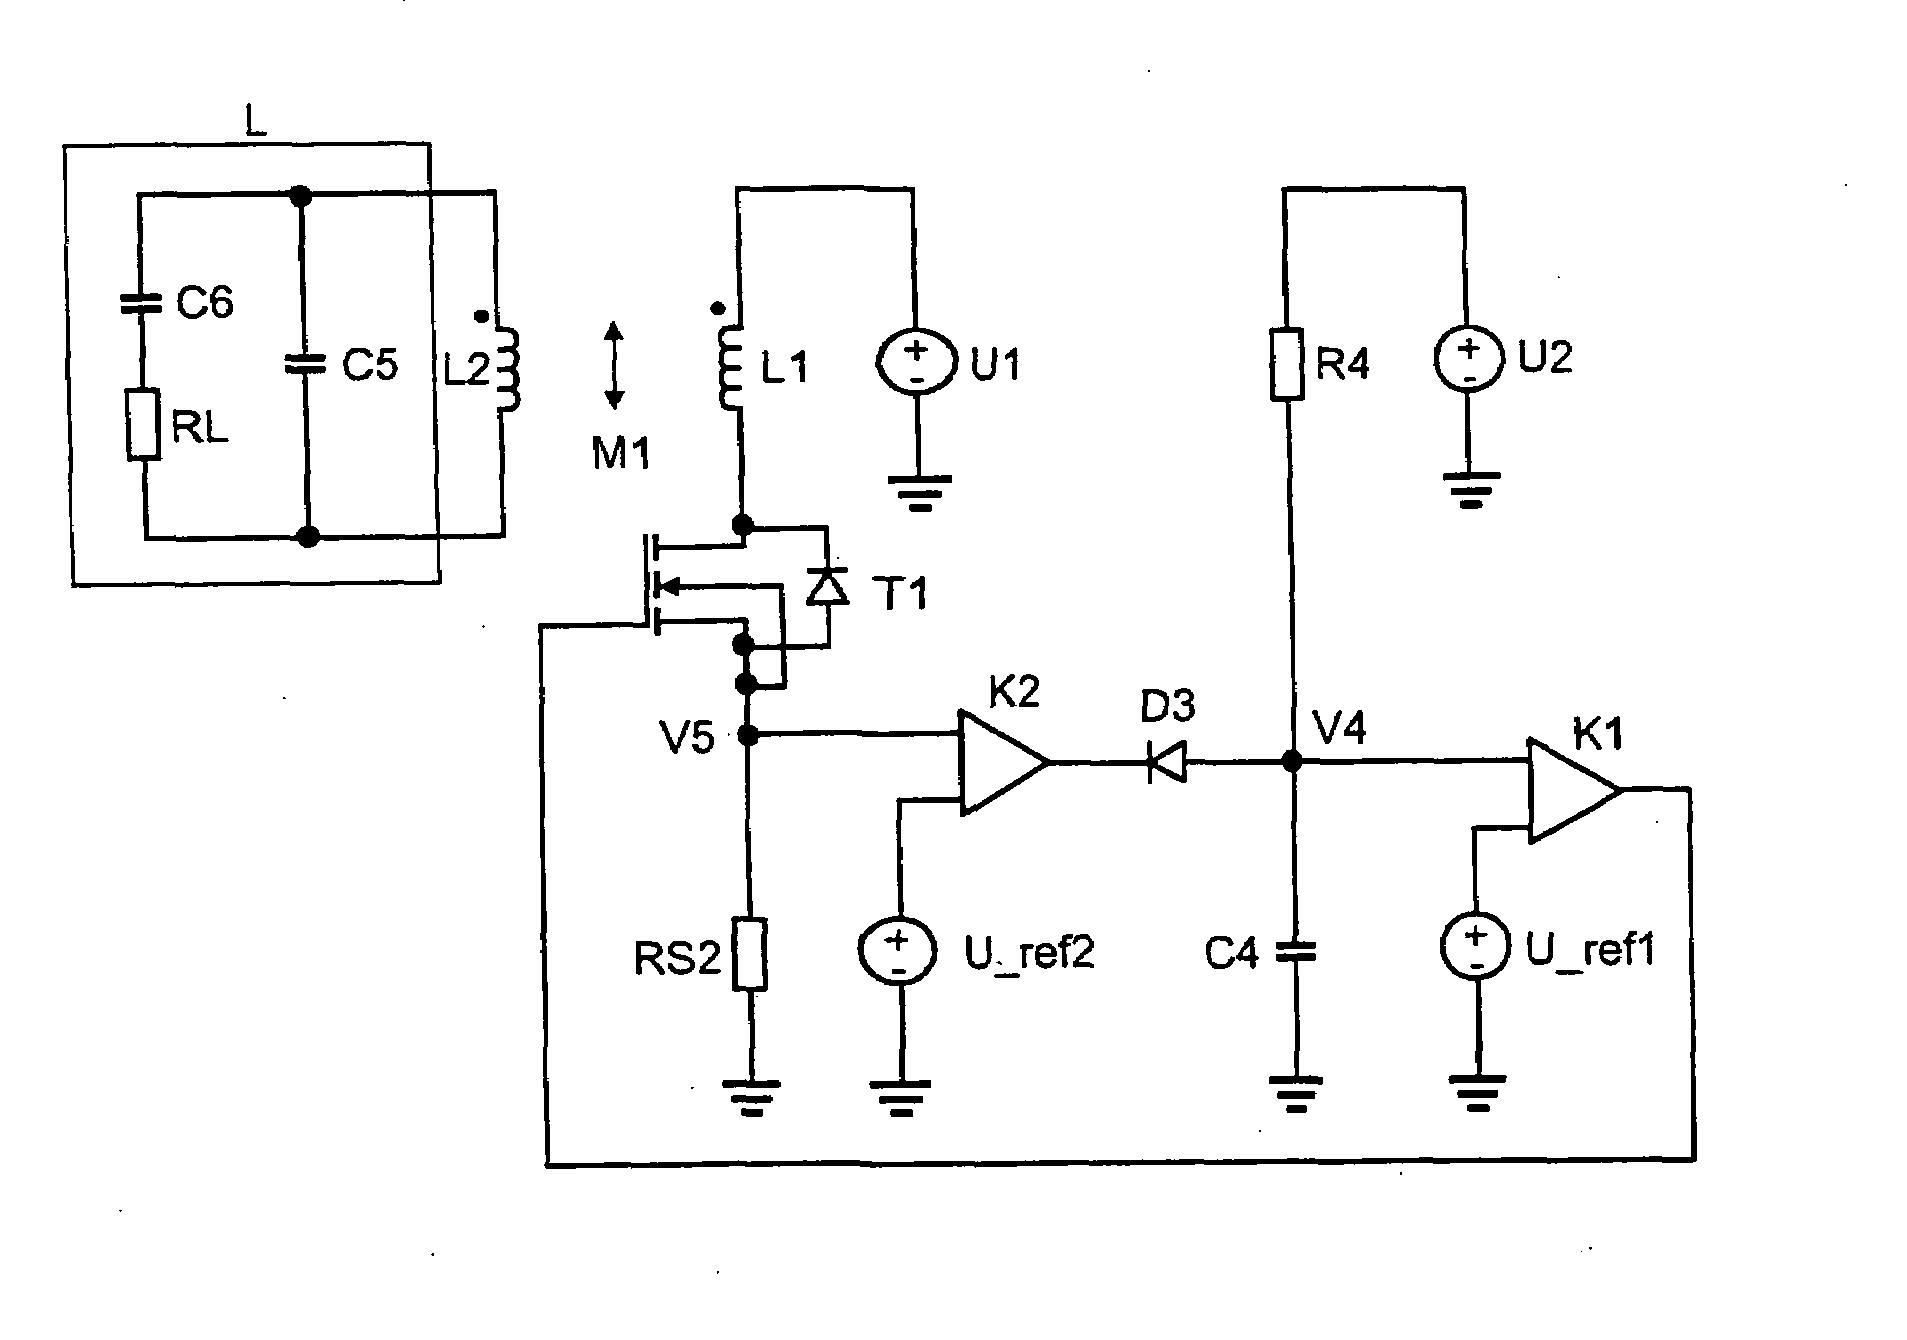 Switch-Off Time Regulation System for an Inverter for Driving a Lamp